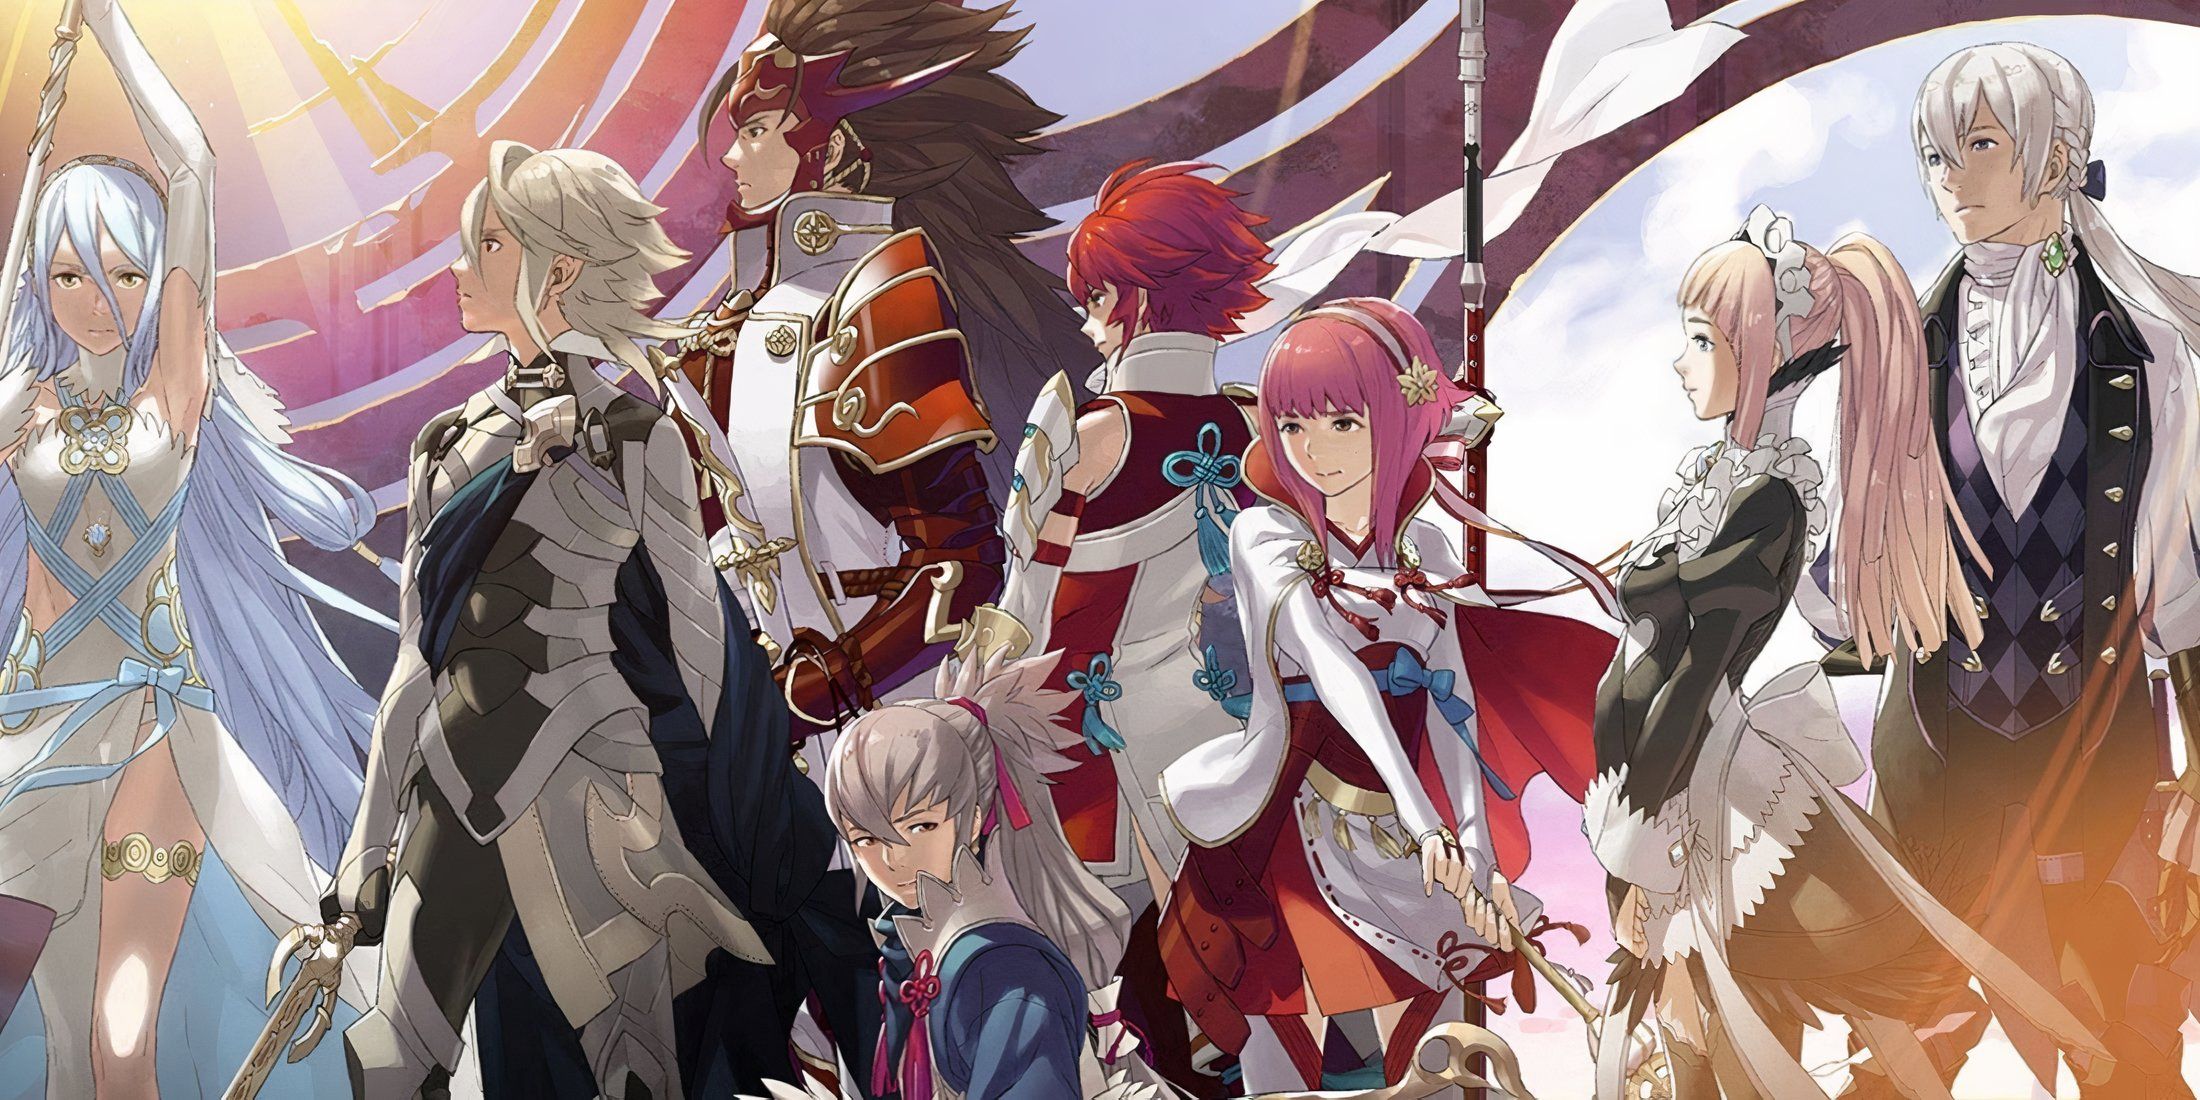 Cover art featuring characters in Fire Emblem Fates Birthright